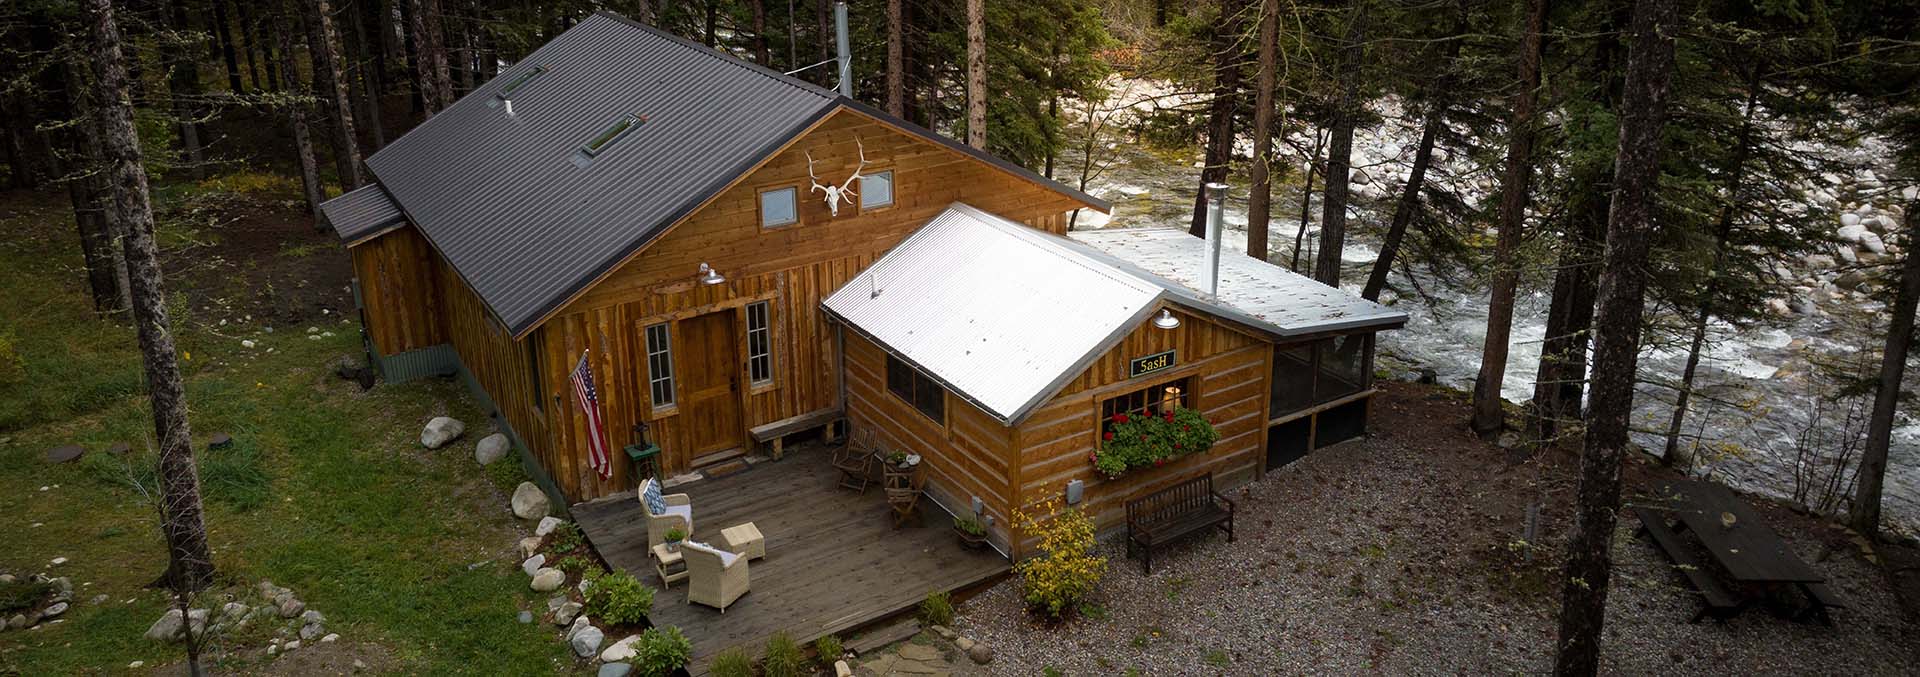 montana fishing cabin for sale 5ash cabin on the boulder